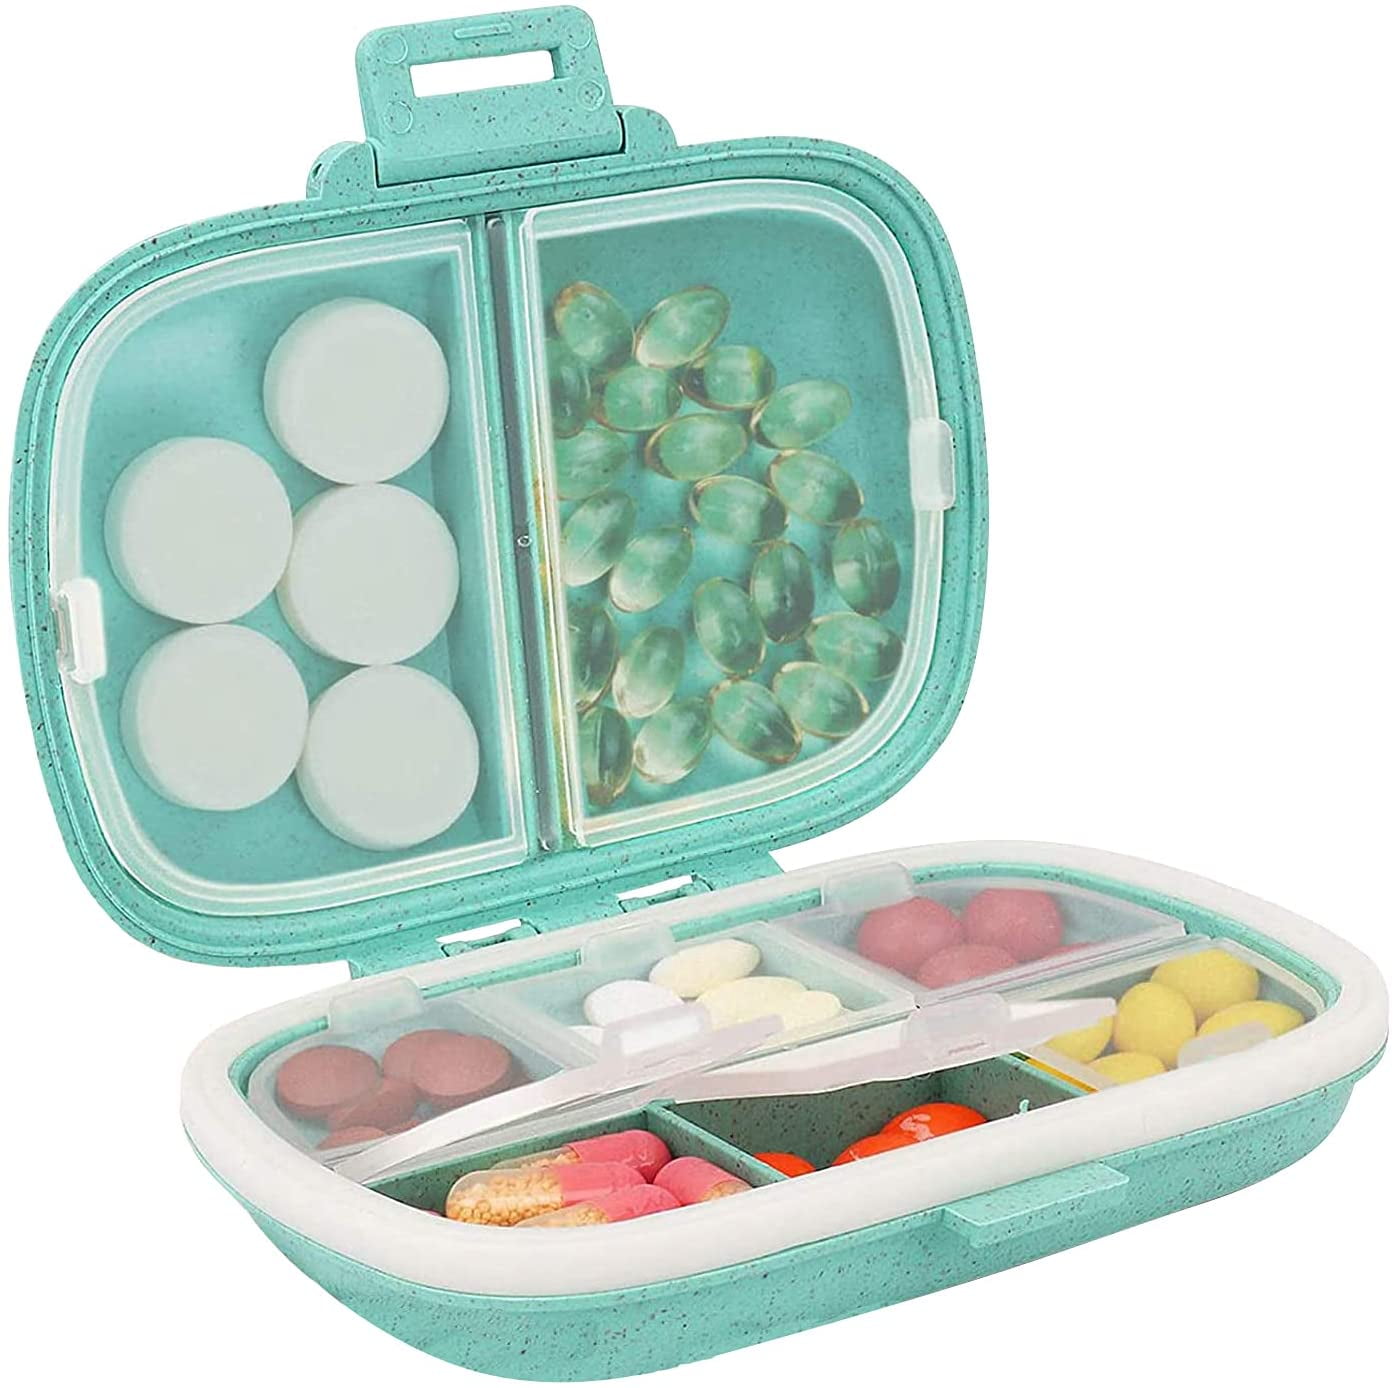 Tnvee 2 Pack 8 Compartments Travel Pill Organizer Moisture Proof Small Pill Box for Pocket Purse Daily Pill Case Portable Medicine Vitamin Holder